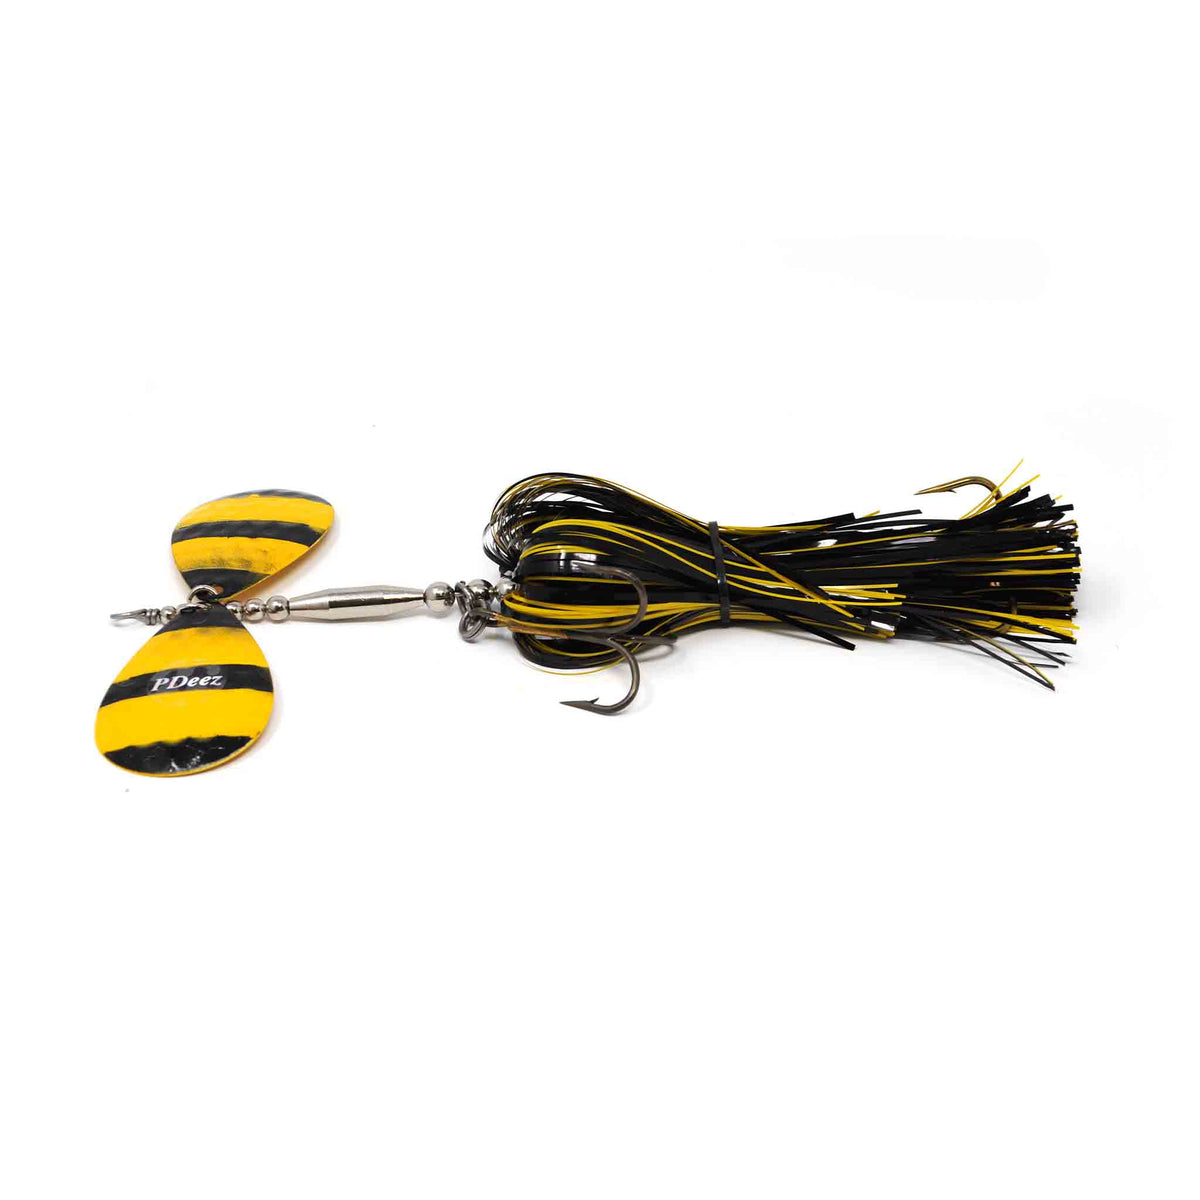 Ardea Pike Fly Fishing Big mouse Deer Hair fishing lure bucktail